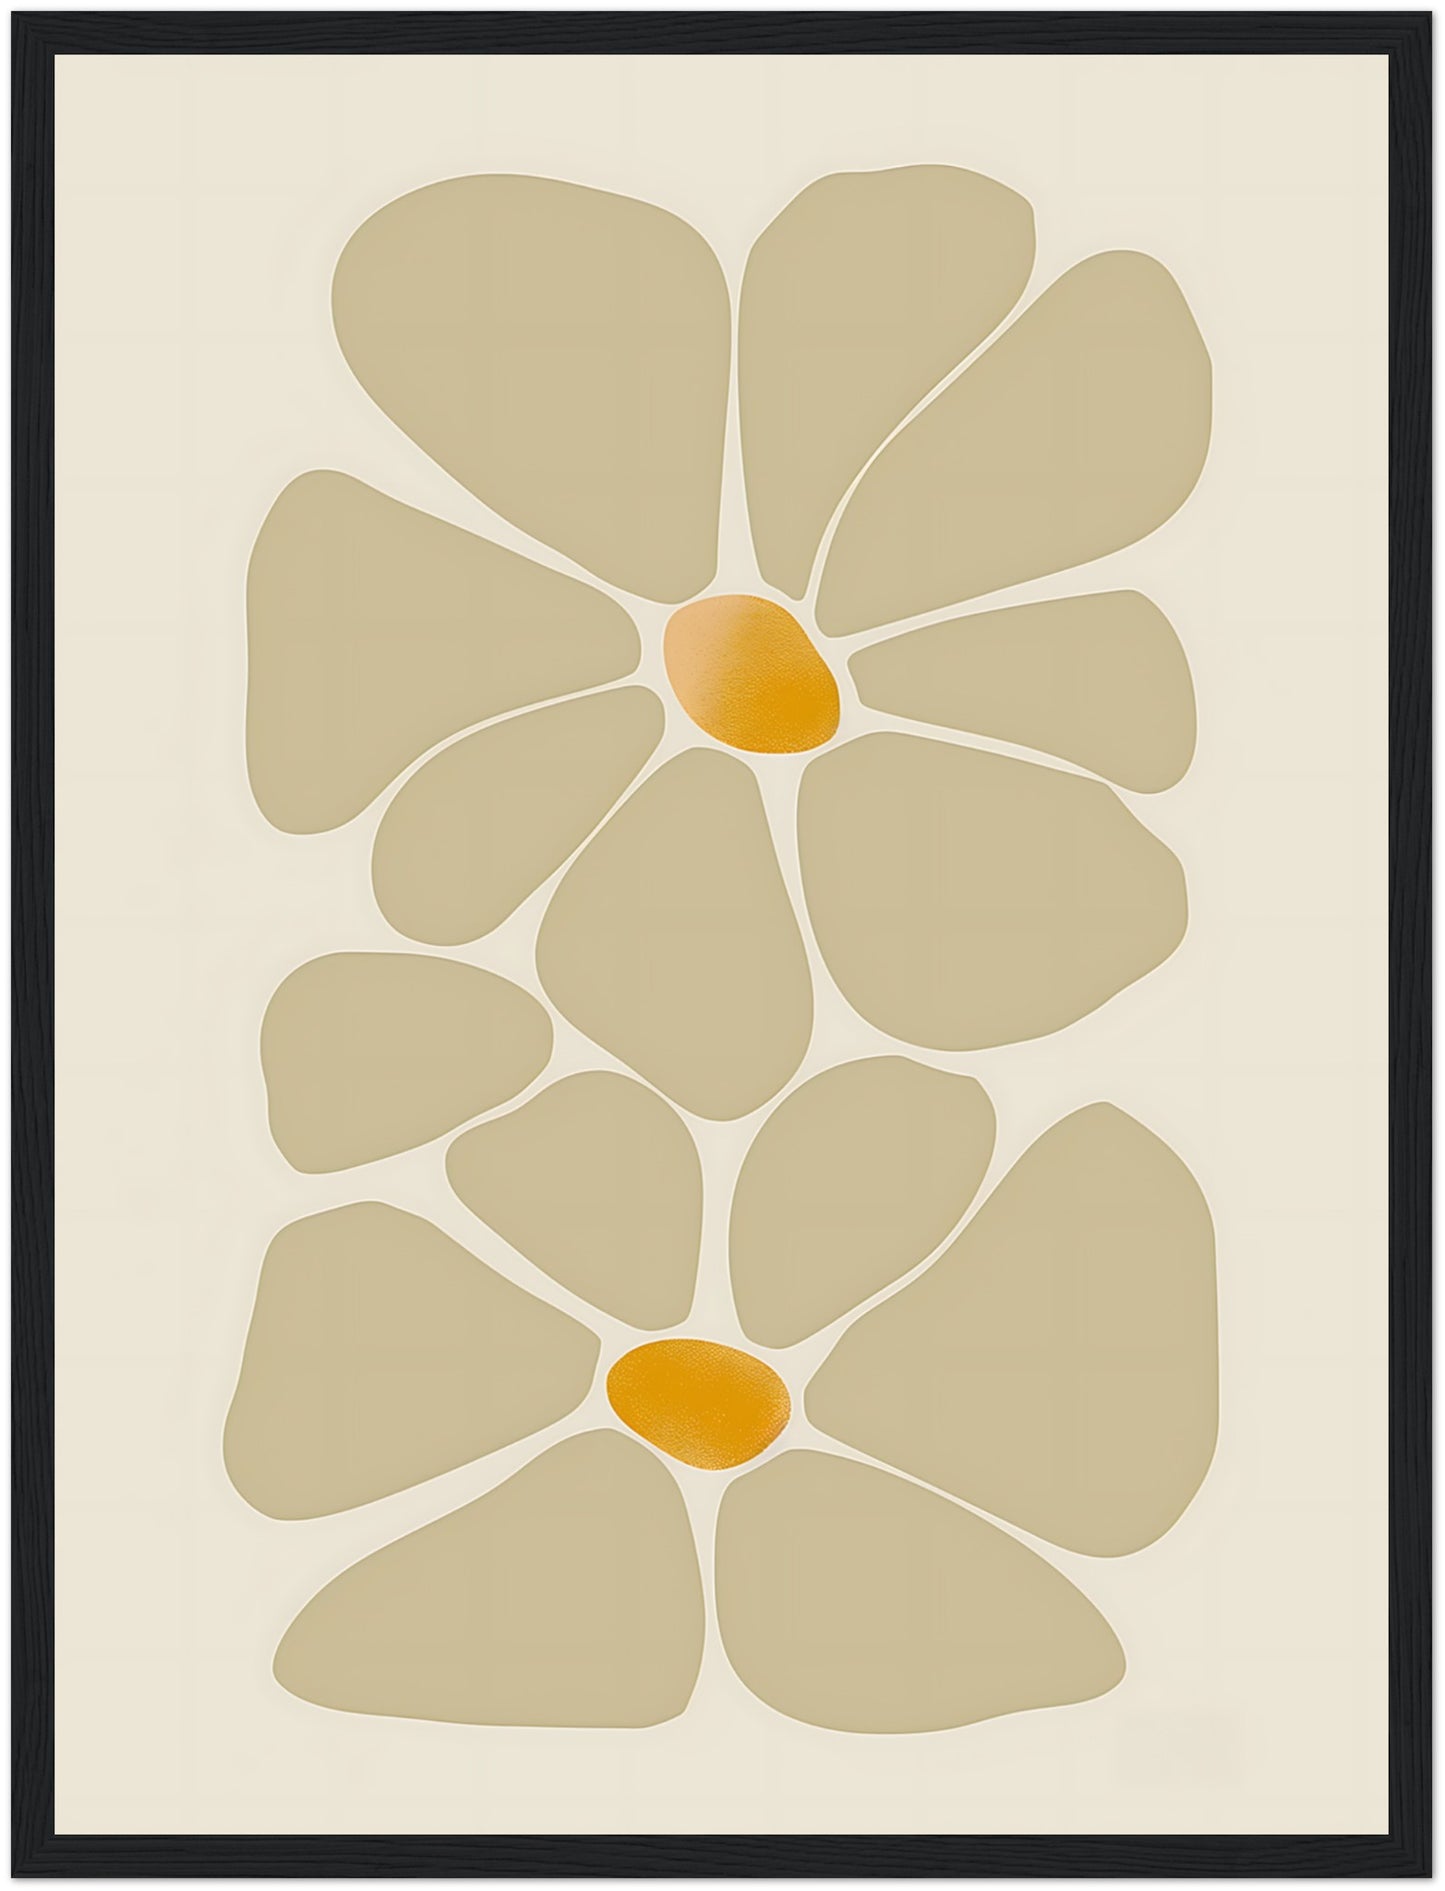 Abstract floral design in earth tones, framed with a wooden border.